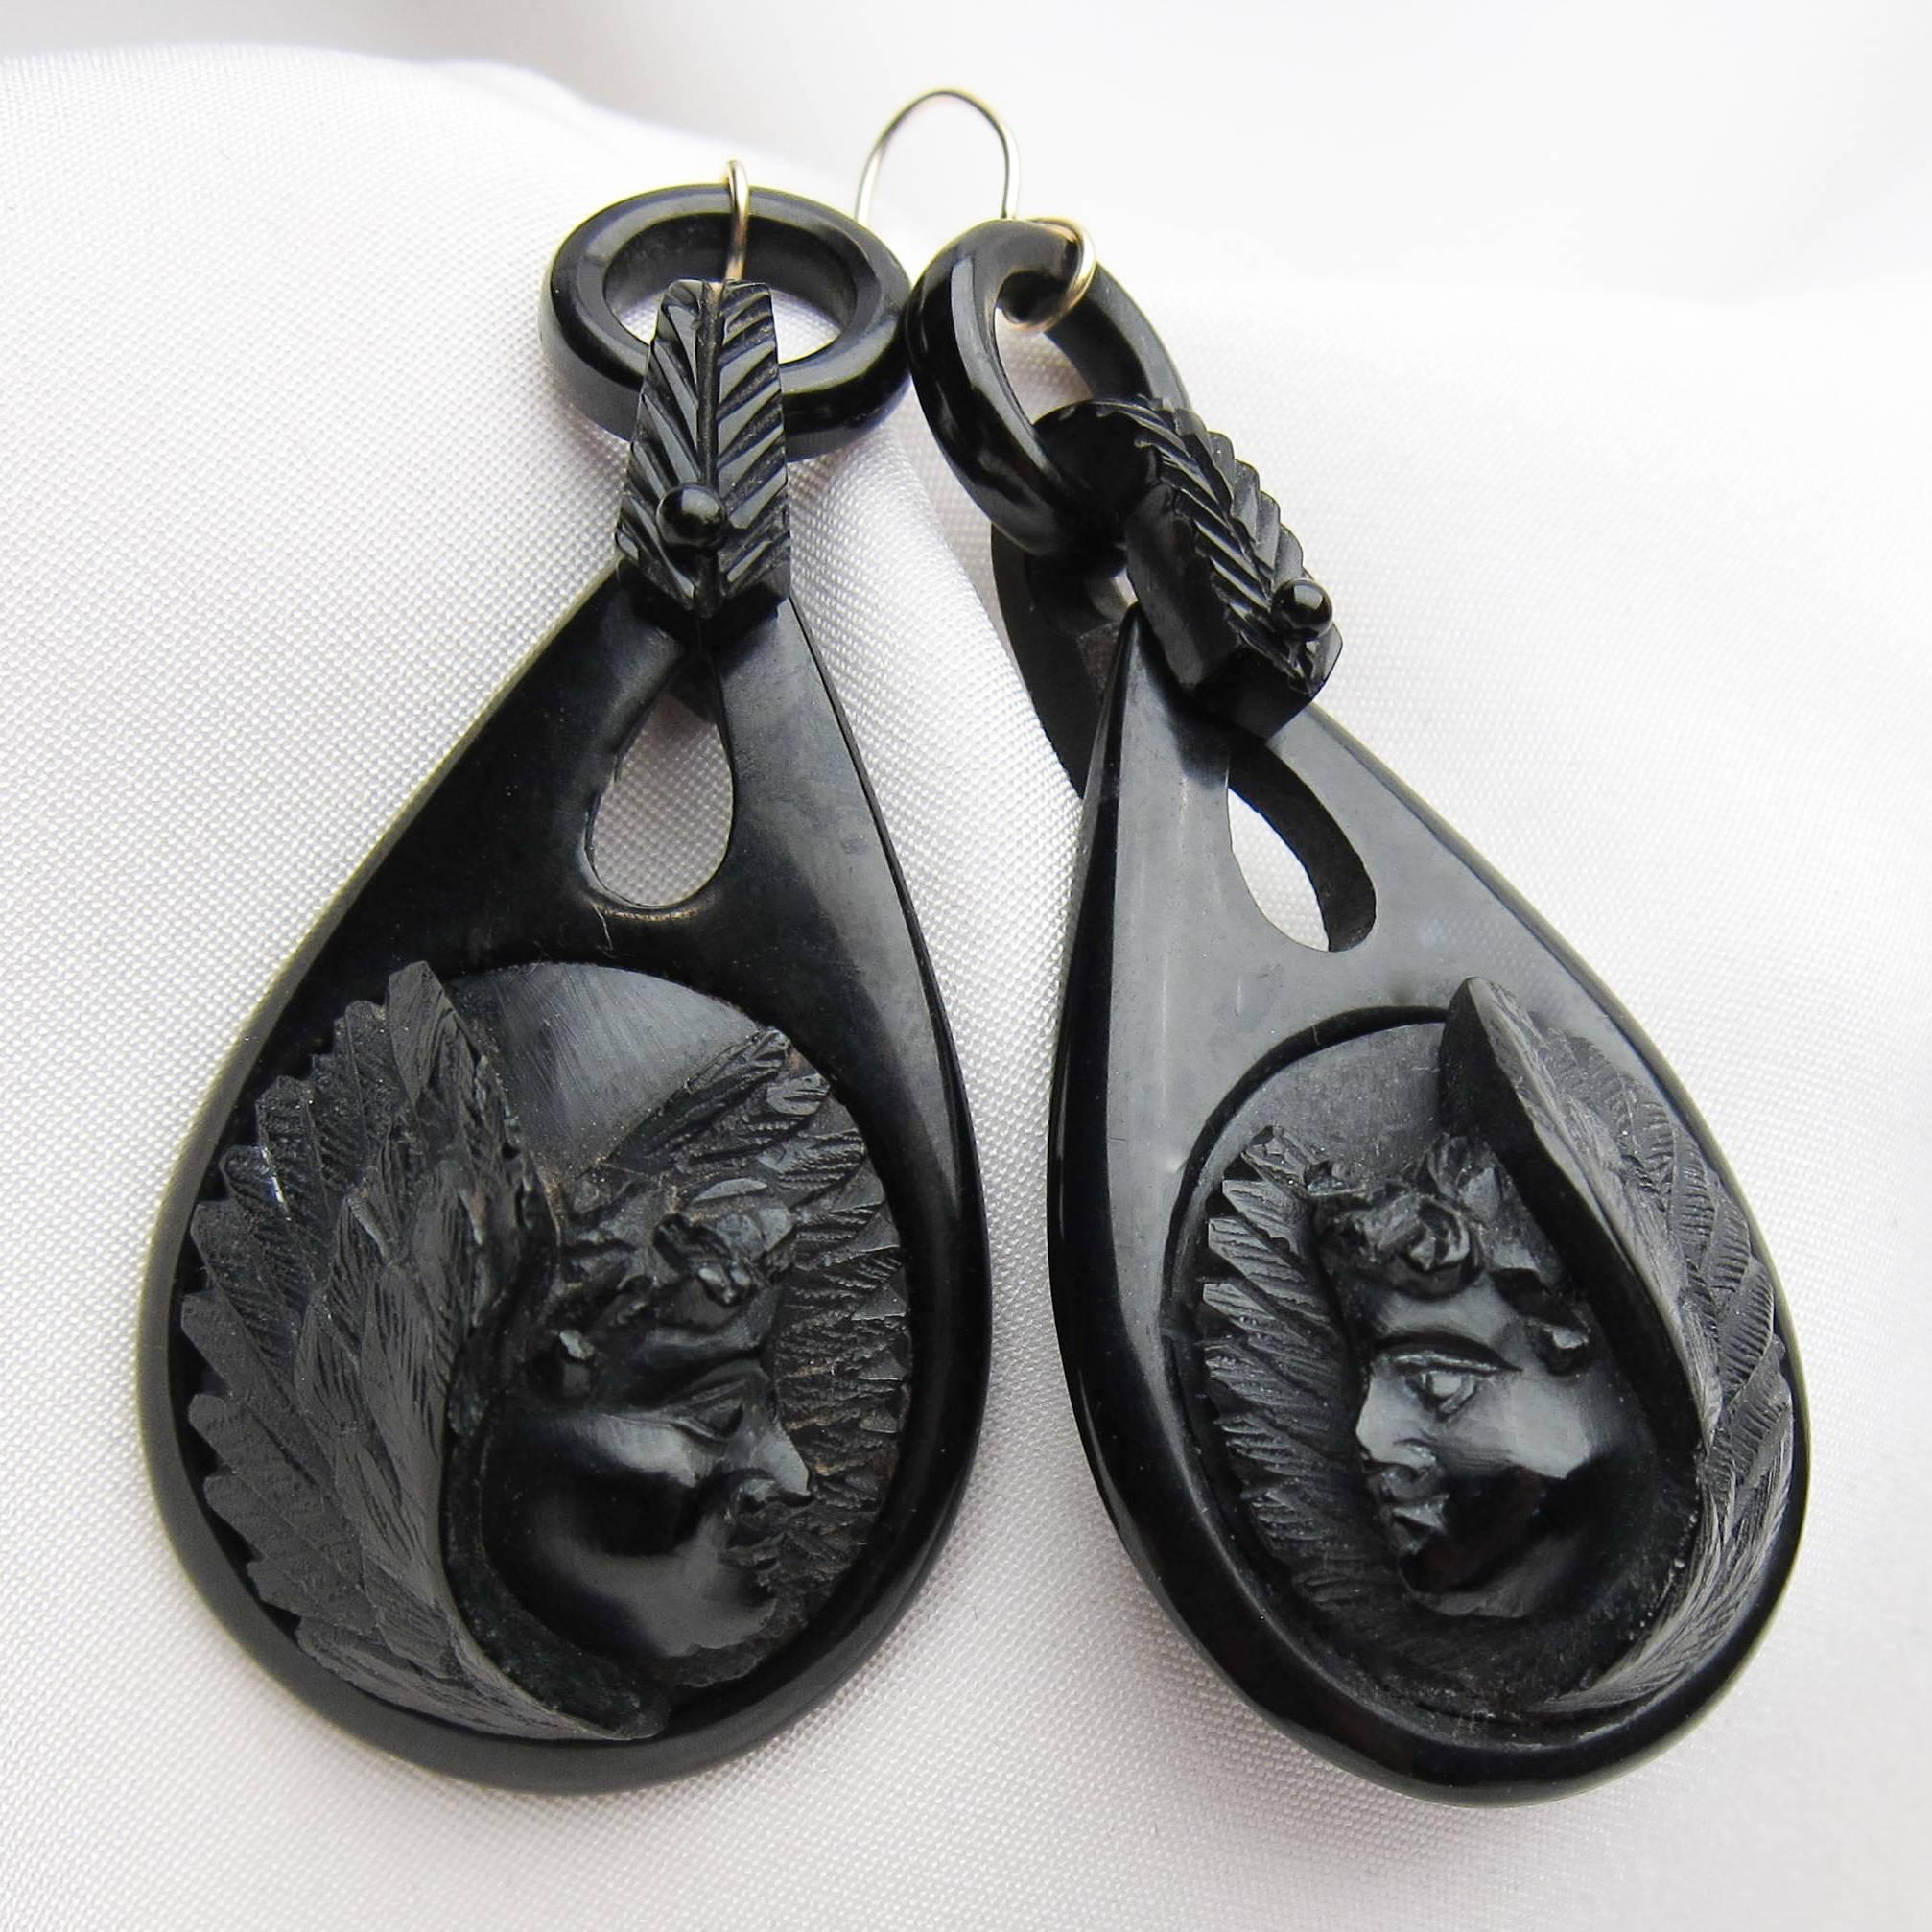 Each of these Victorian mourning earrings features a teardrop-shaped piece of gutta-percha carved with the face of a plump cherub. Black jewelry was popular in the late Victorian Era as Queen Victoria mourned the death of Price Albert, and her